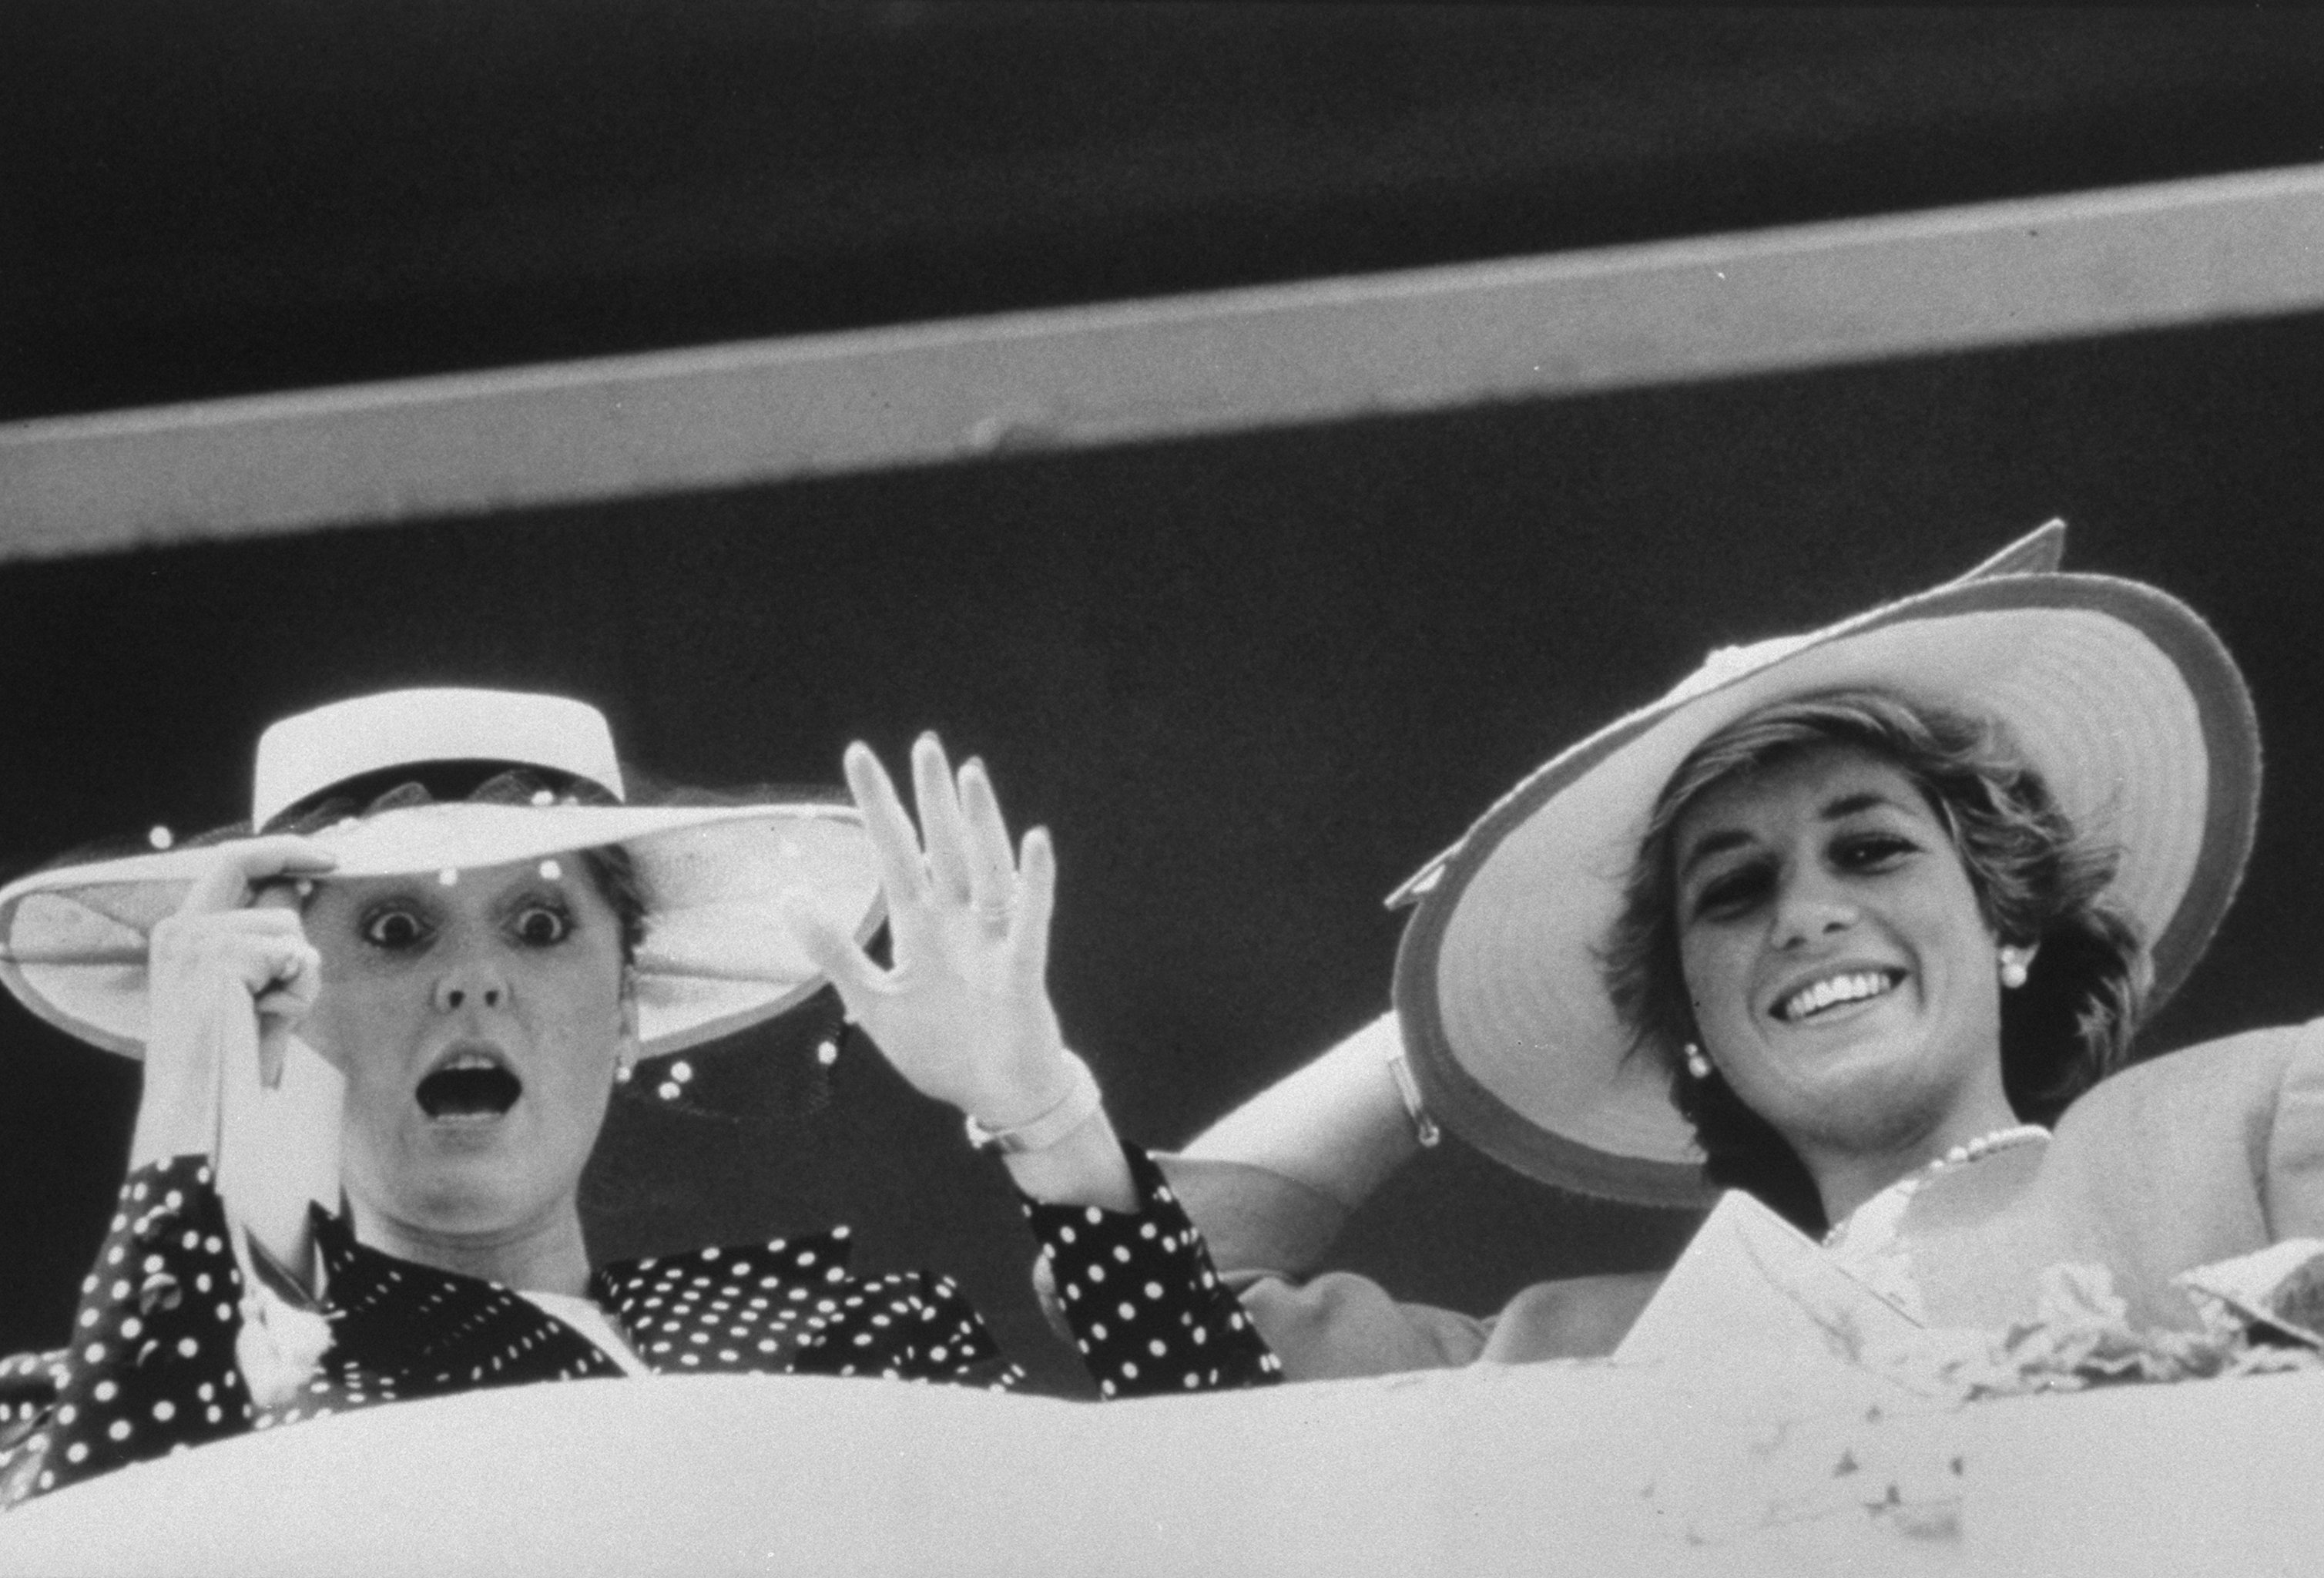 Princess Diana with her sister-in-law Sarah, Duchess of York, both wearing large hats at Epsom Downs. / Source: Getty Images